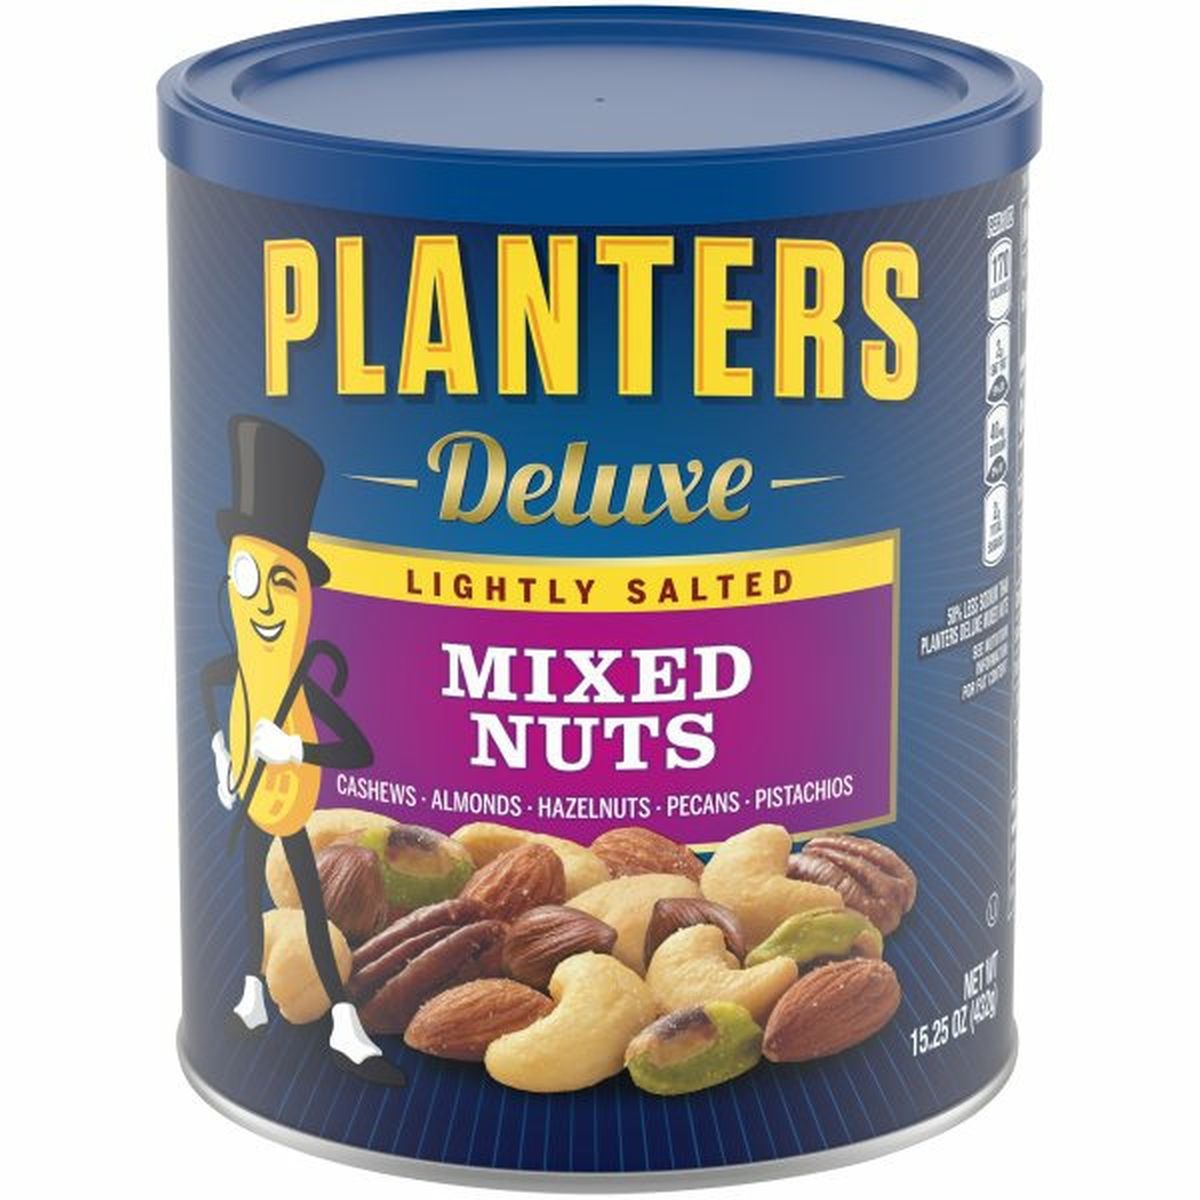 Calories in Planters Mixed Nuts, Lightly Salted